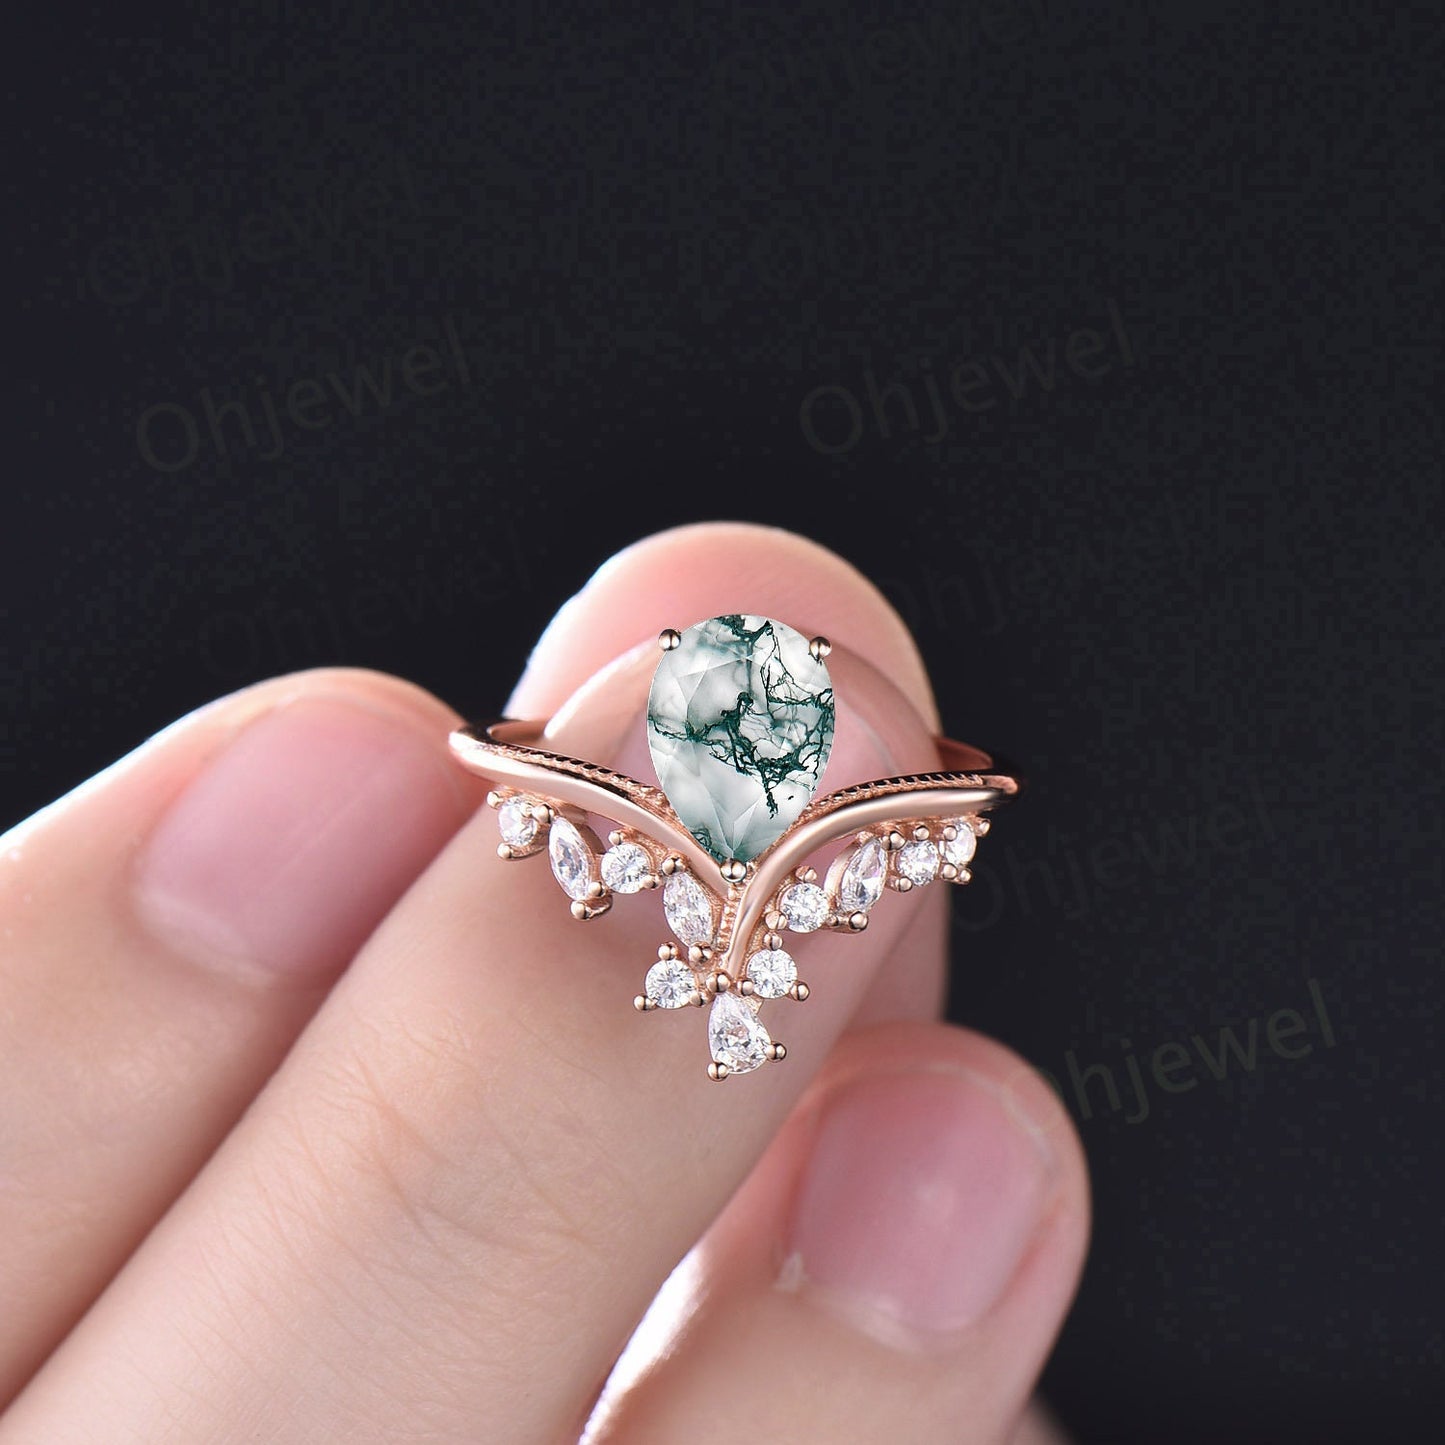 Moss agate ring vintage pear shaped moss agate engagement ring 14k rose gold silver art deco cluster diamond promise wedding ring women gift